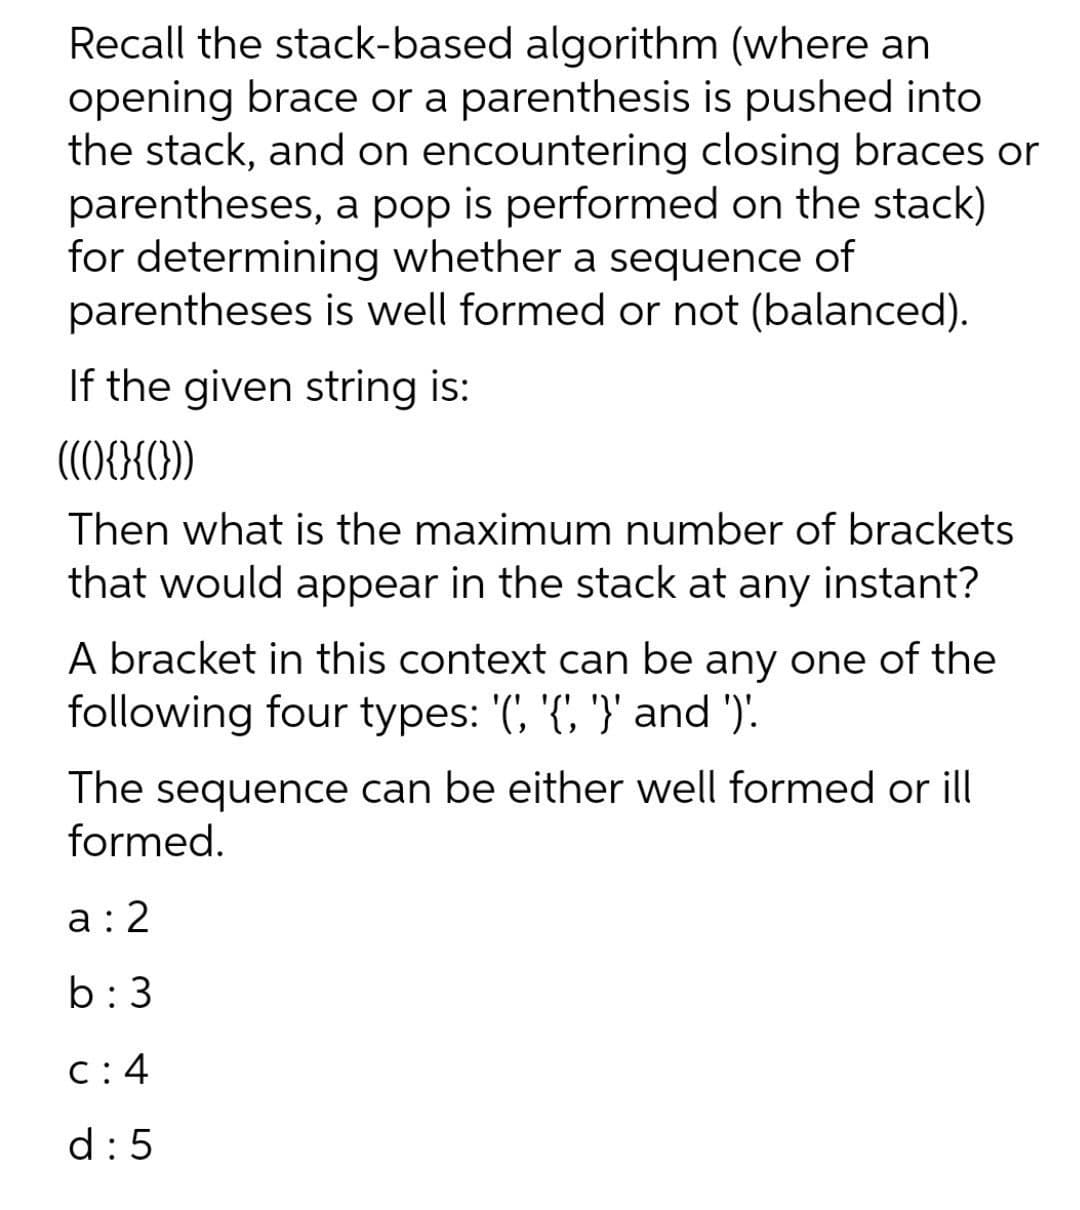 Recall the stack-based algorithm (where an
opening brace or a parenthesis is pushed into
the stack, and on encountering closing braces or
parentheses, a pop is performed on the stack)
for determining whether a sequence of
parentheses is well formed or not (balanced).
If the given string is:
Then what is the maximum number of brackets
that would appear in the stack at any instant?
A bracket in this context can be any one of the
following four types: '(, '{', '}' and ').
The sequence can be either well formed or ill
formed.
a:2
b:3
C: 4
d:5
